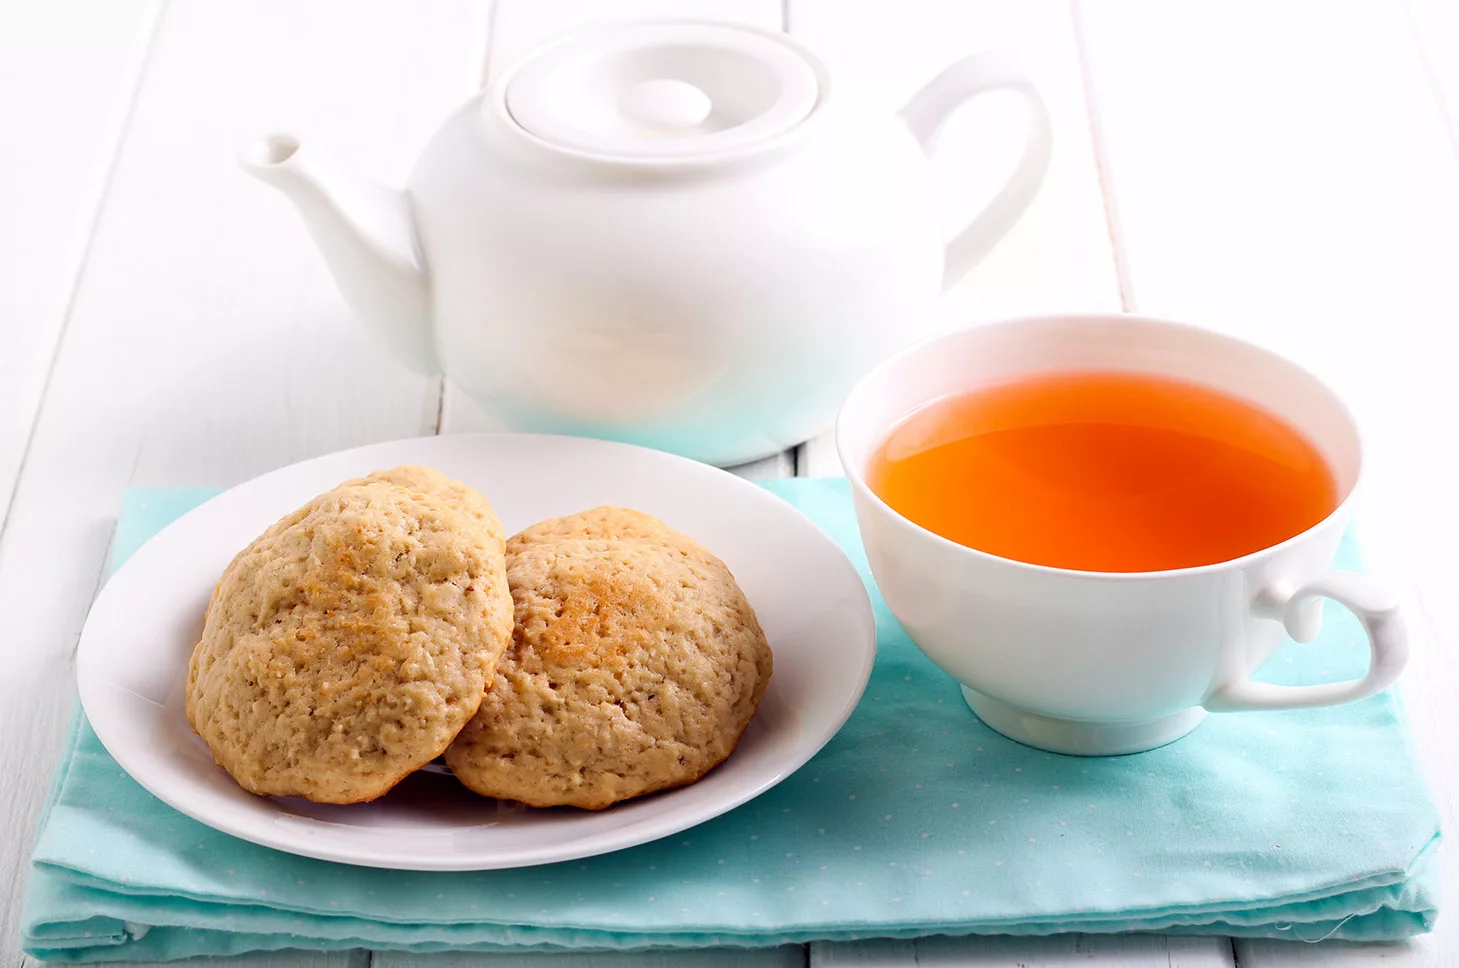 Cup of reddish tea in tea cup with saucer of two handmade cookies. Small tea pot behind.